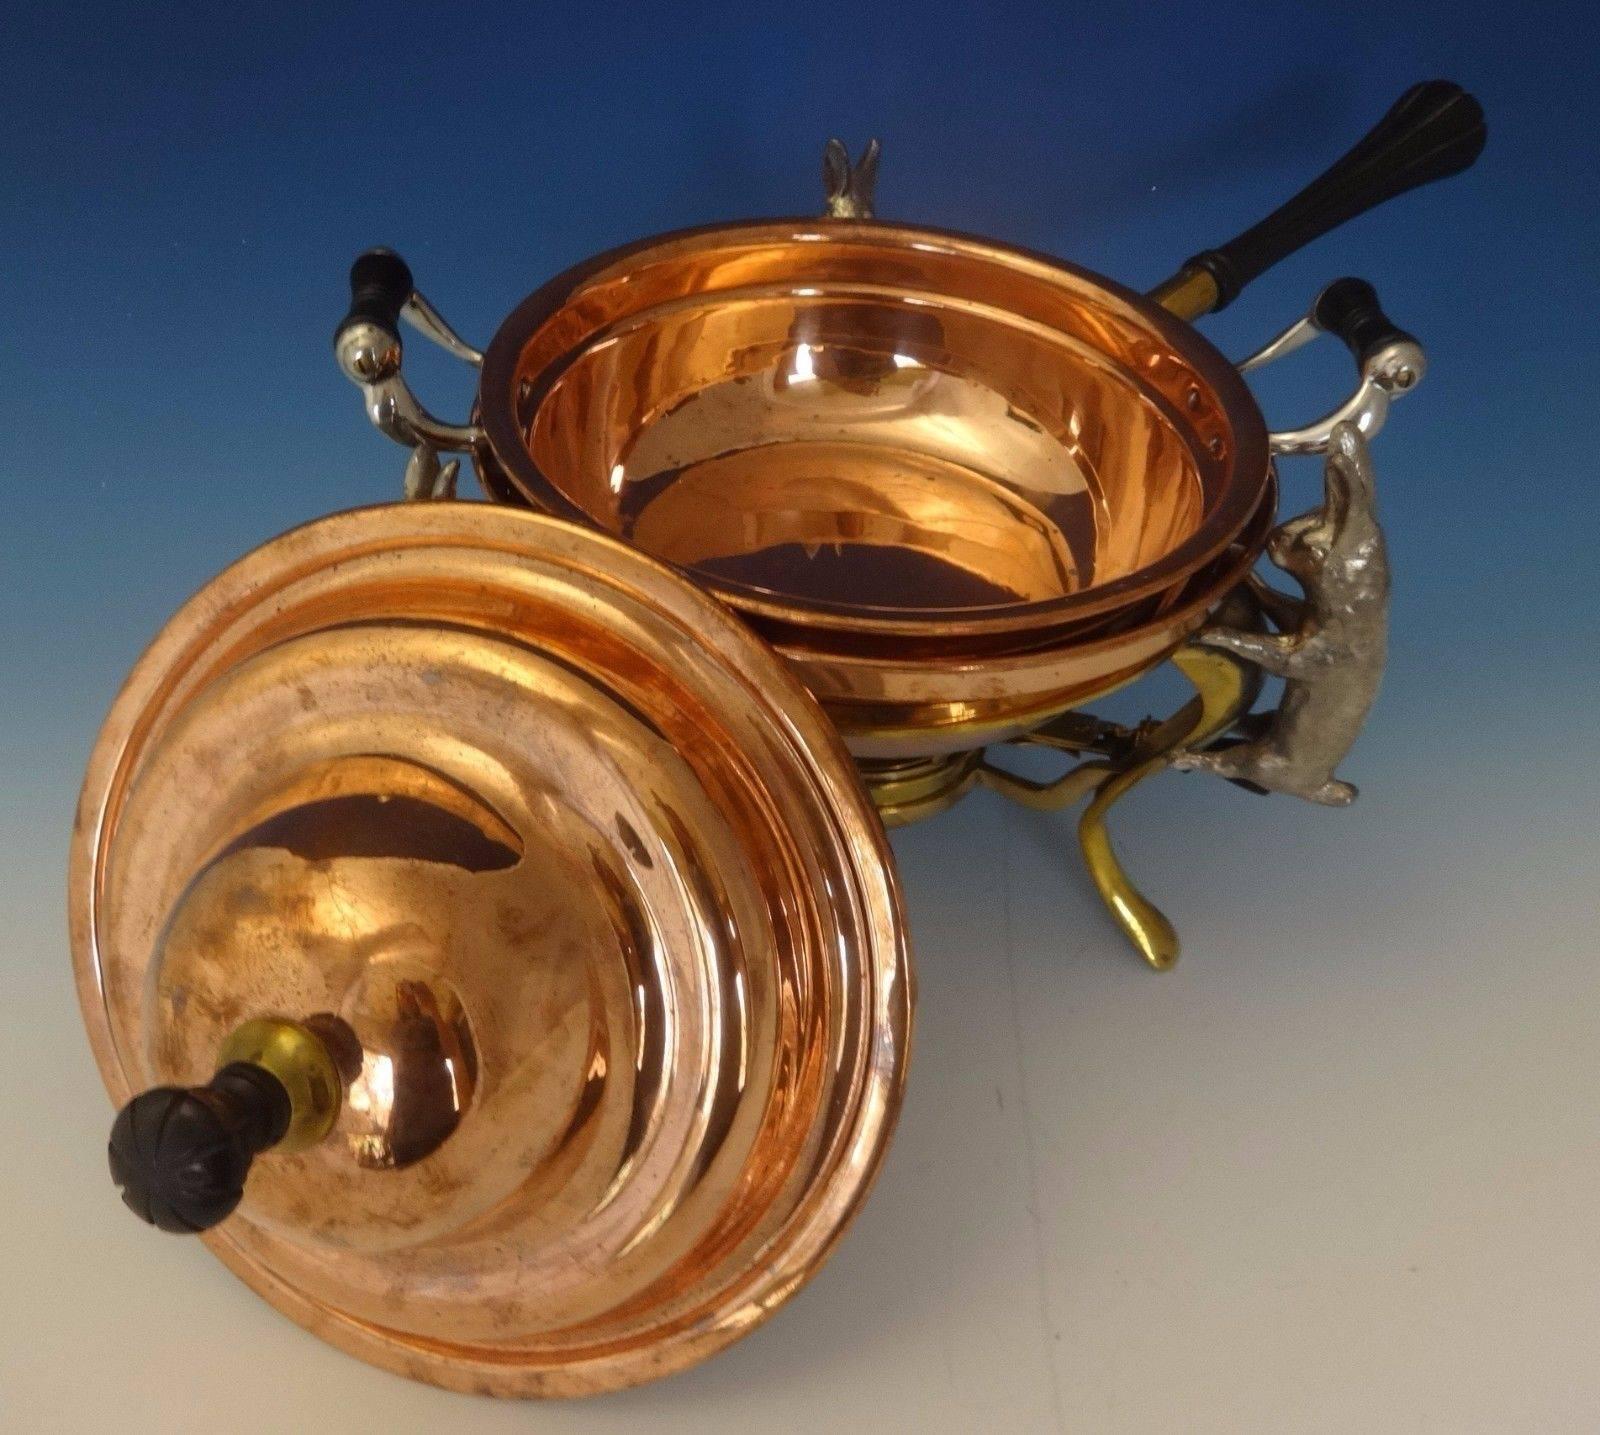 Joseph Heinrichs.

 This copper and brass chafing dish was made by Joseph Heinrichs. The piece has silverplate 3-D rabbits with a copper and bronze pot and ebony finials and handle. It dates from about 1905 and it measures 12